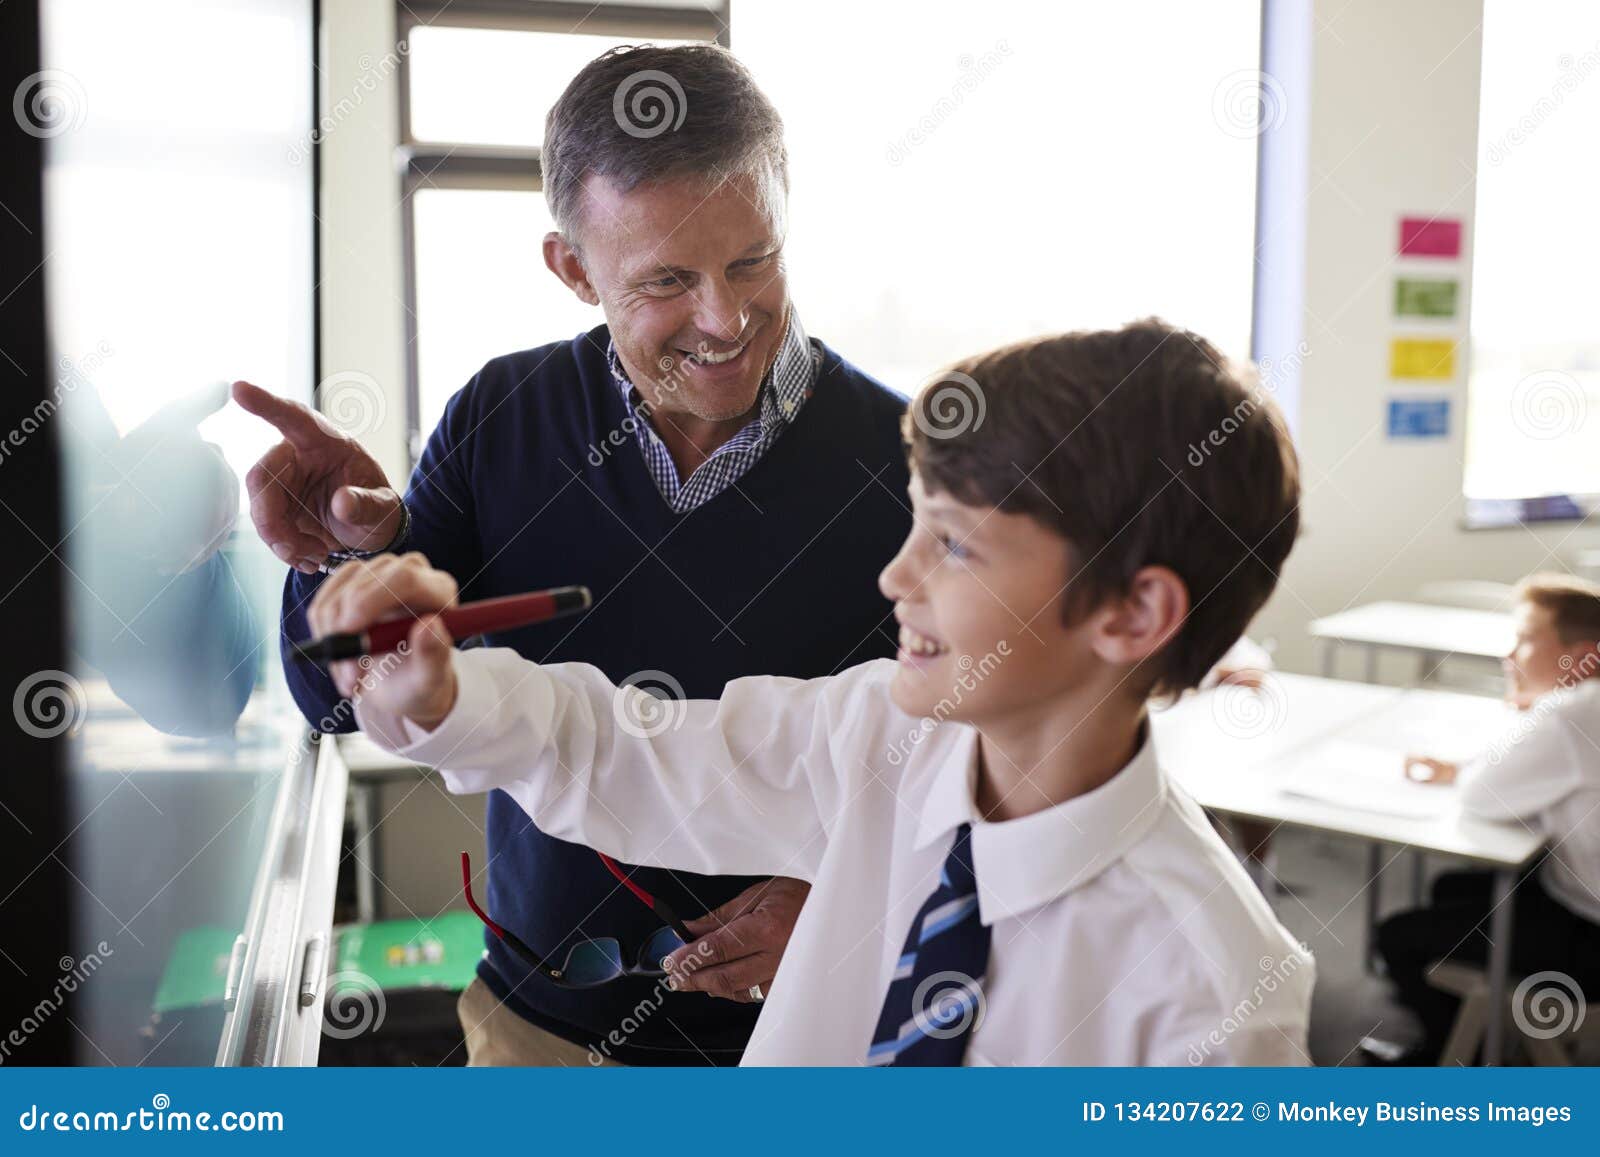 high school teacher with male student wearing uniform using interactive whiteboard during lesson